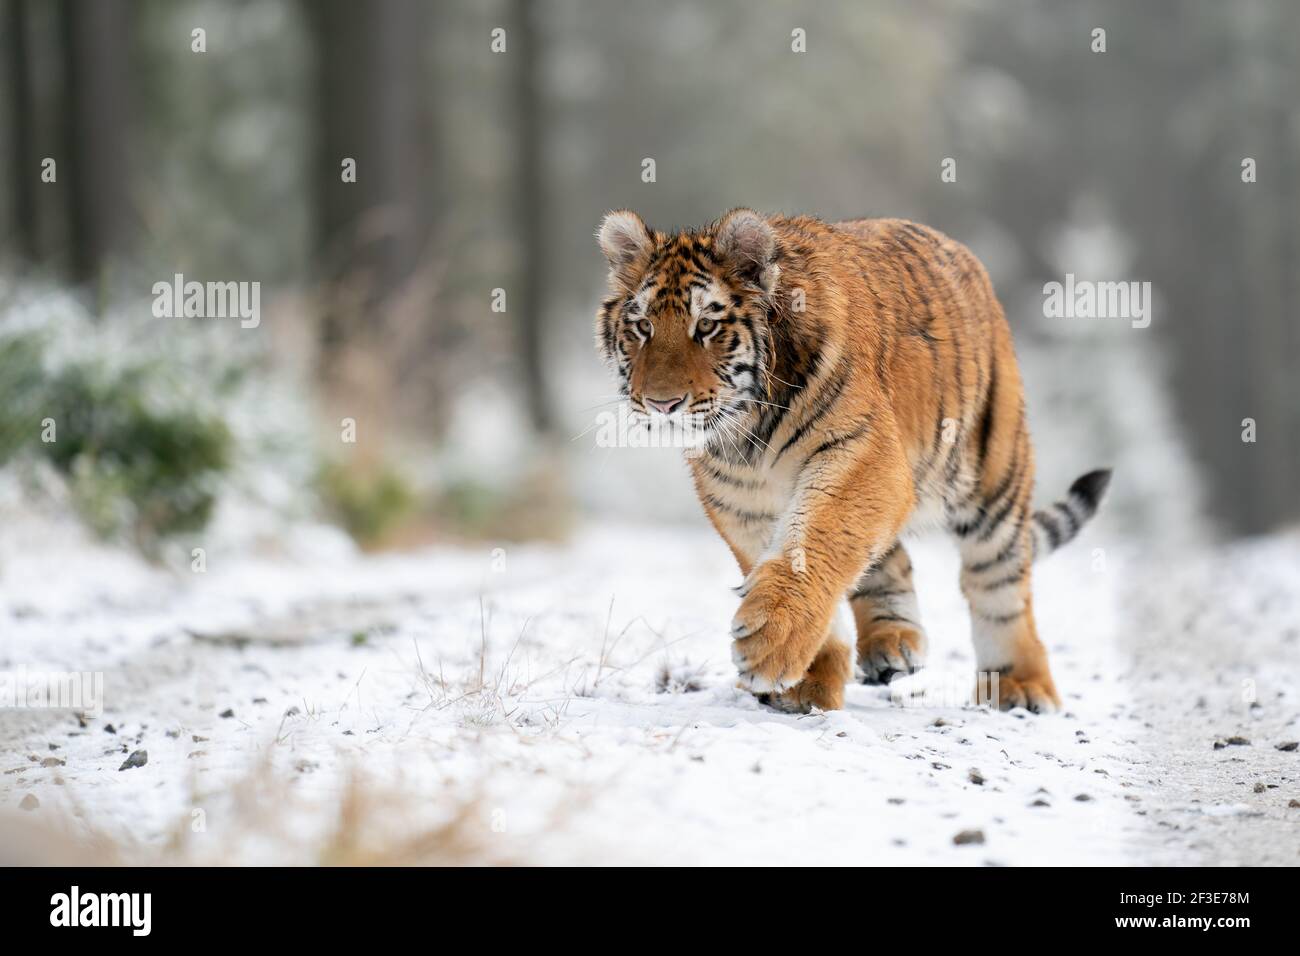 Siberian tiger walking, front view on path in the forest. A dangerous beast in its natural habitat. Stock Photo